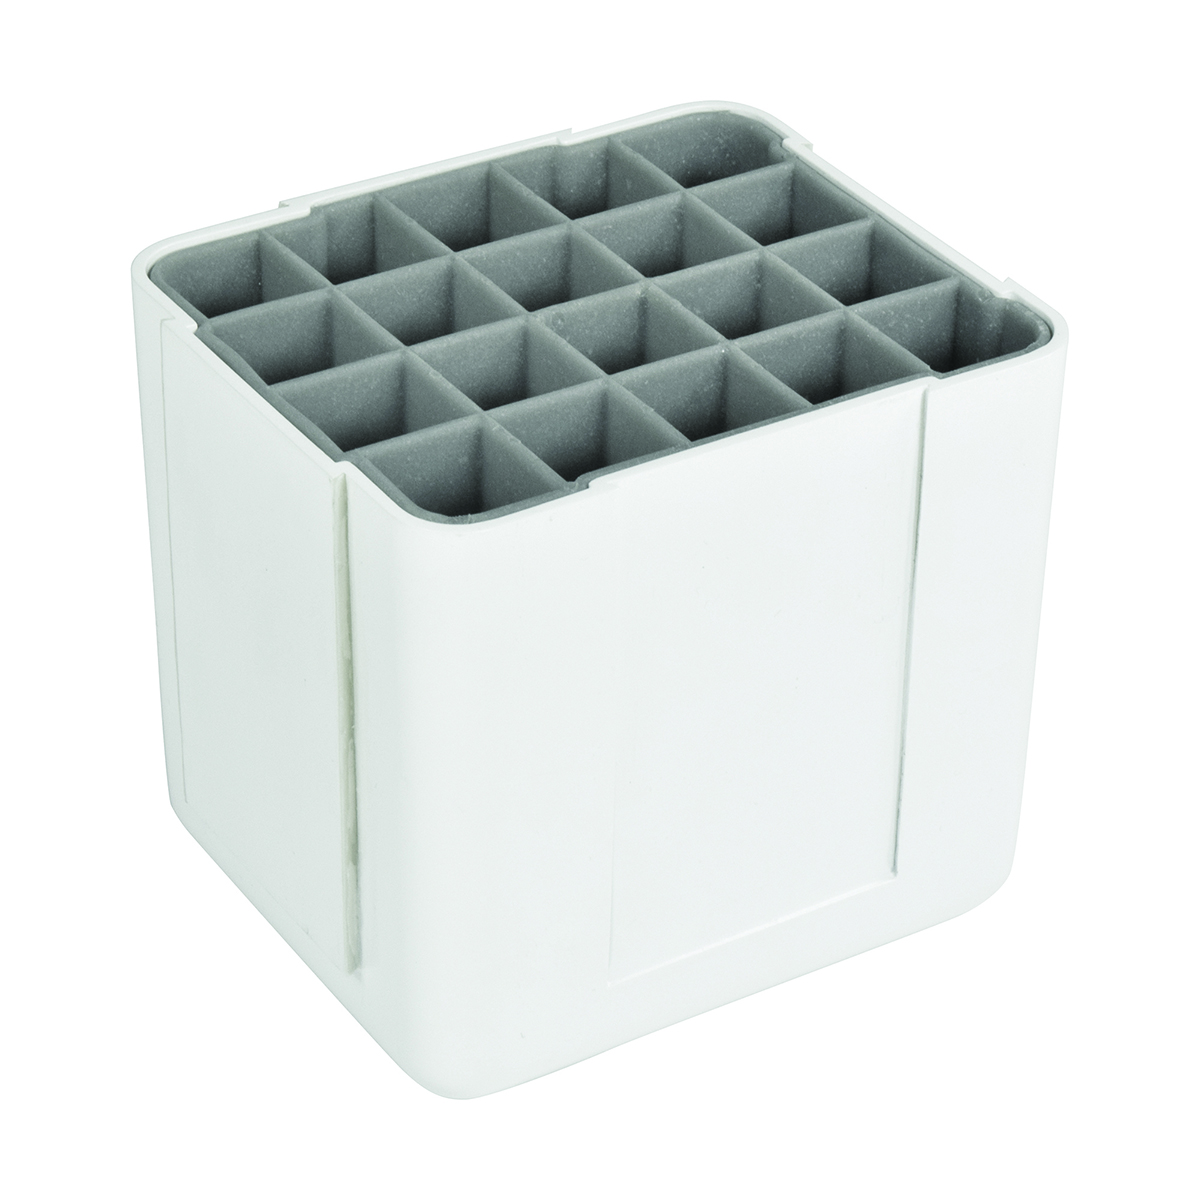 https://www.containerstore.com/catalogimages/392491/10080742-Deflecto-Marker-Organizer-I.jpg